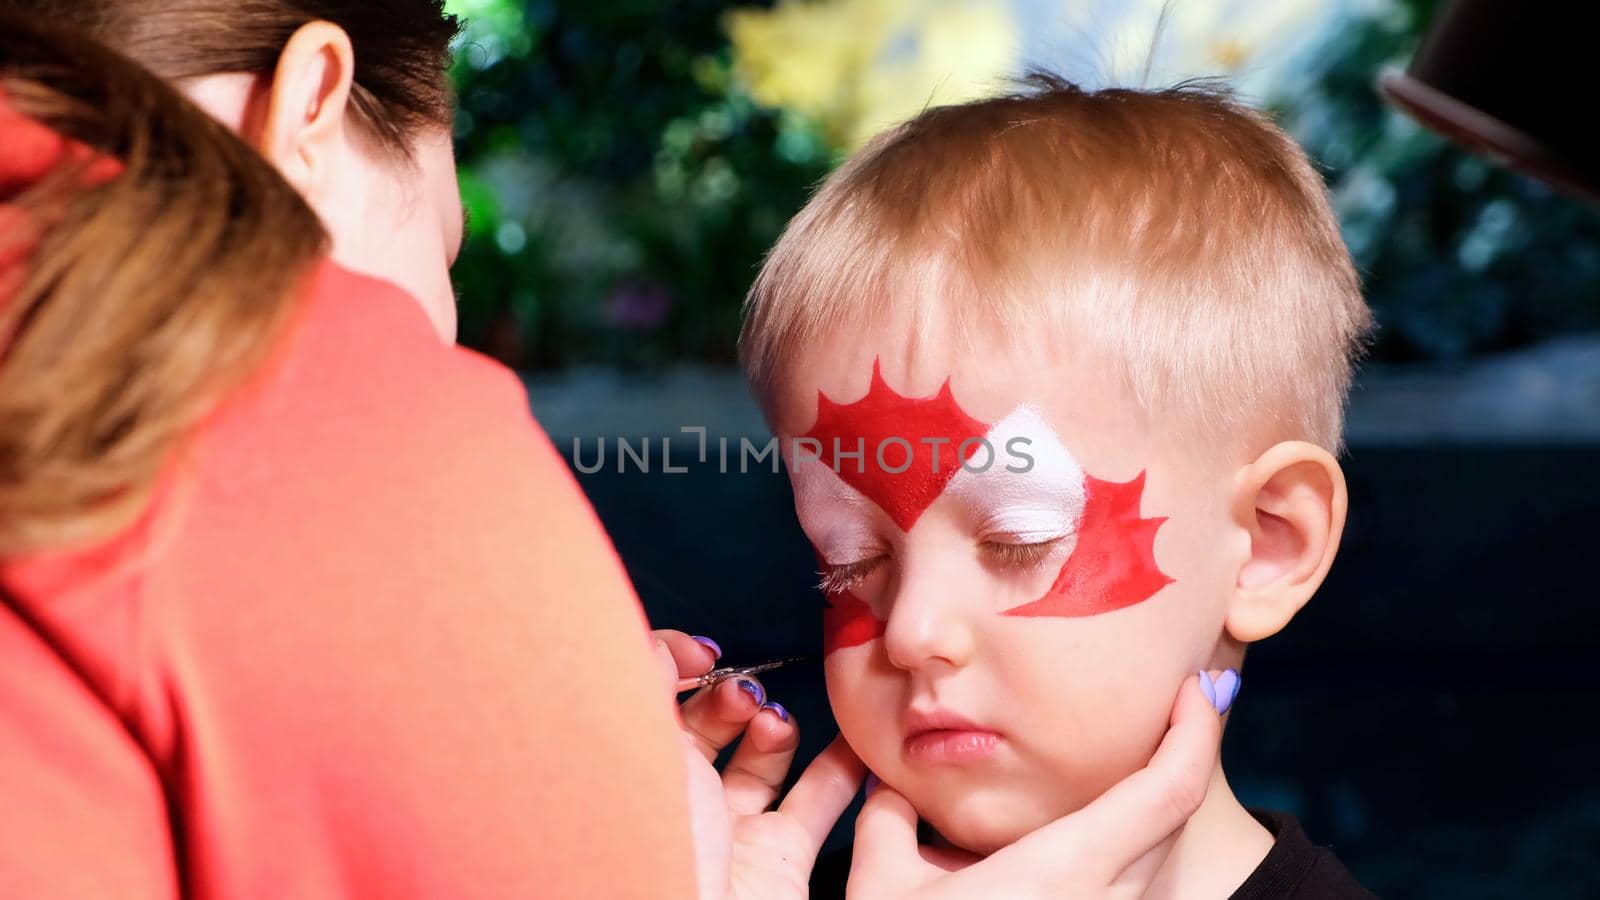 A little boy is put face painting on his face, his face is painted with paint. The concept of children's holiday, childhood, entertainment event, Halloween by chelmicky